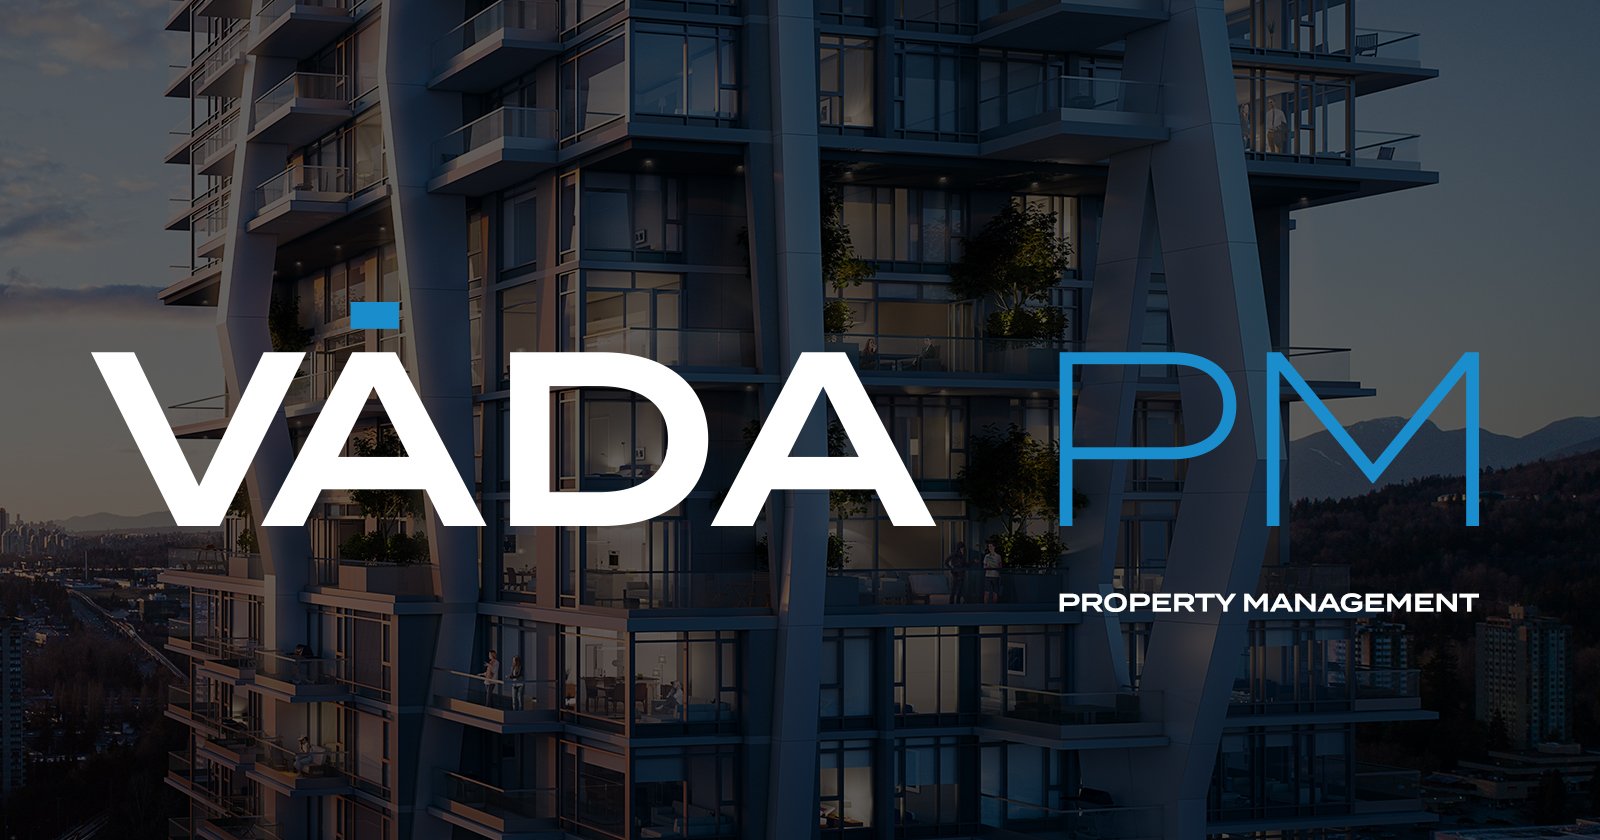 Vada Property Management cover